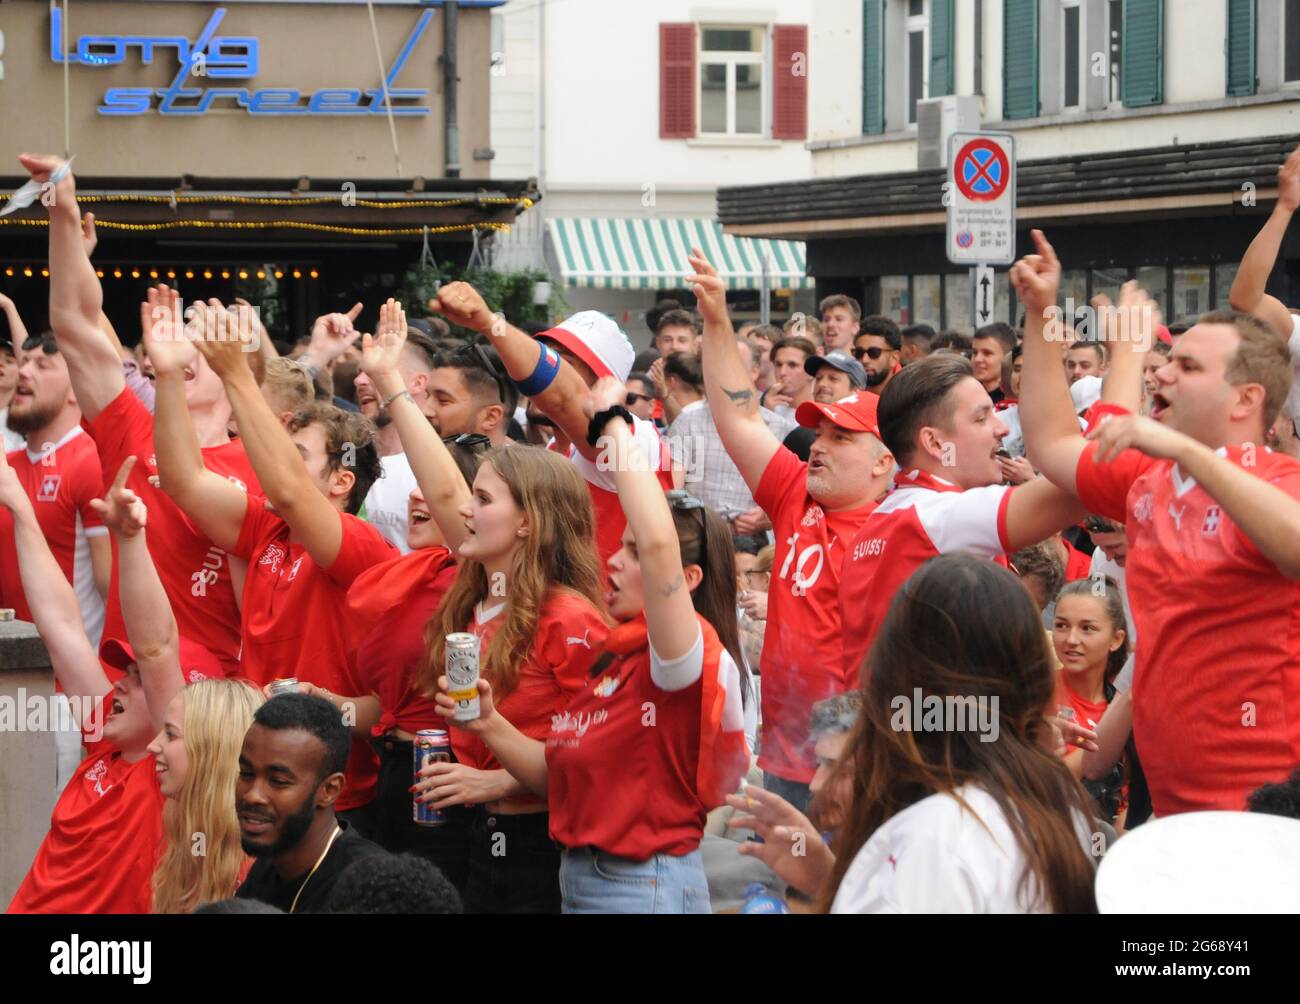 Switzerland: Public football event at Longstreet in Zürich city at the UEFA champion chip 2021 Switzerland against Spain Stock Photo